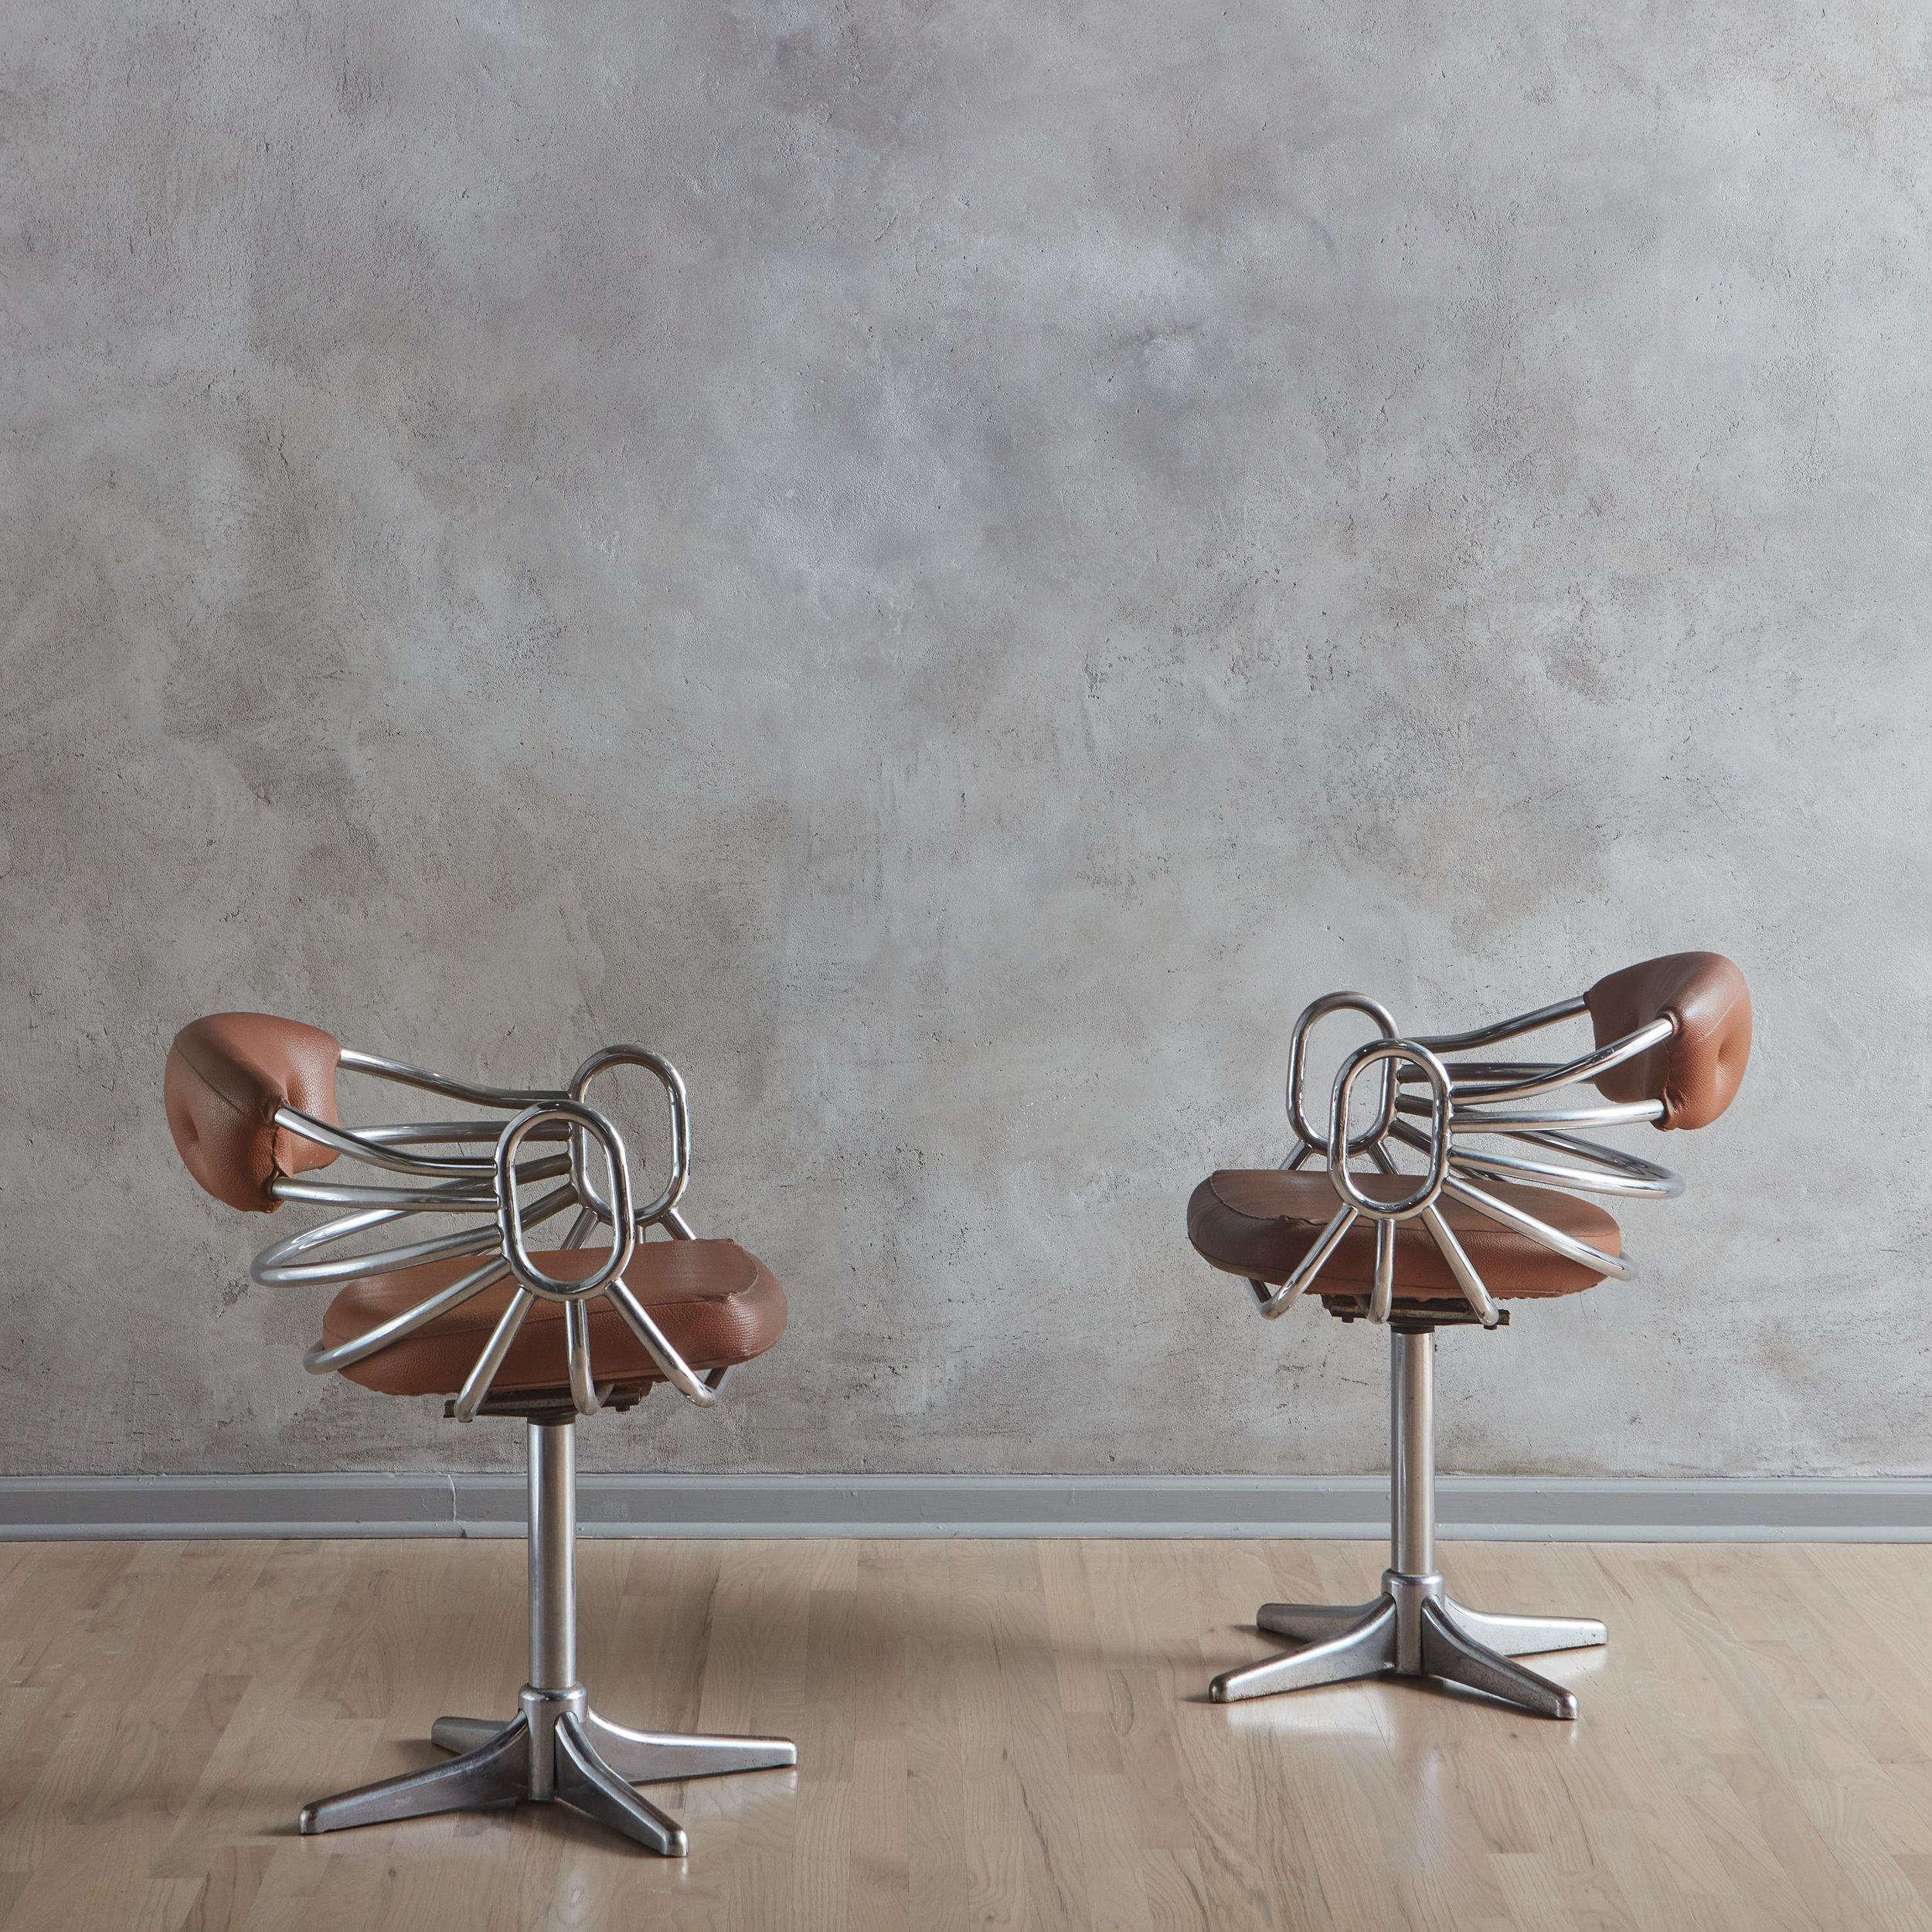 Mid-20th Century Chrome Swivel Desk Chair in Brown Leather, Italy 1960s - 2 Available For Sale